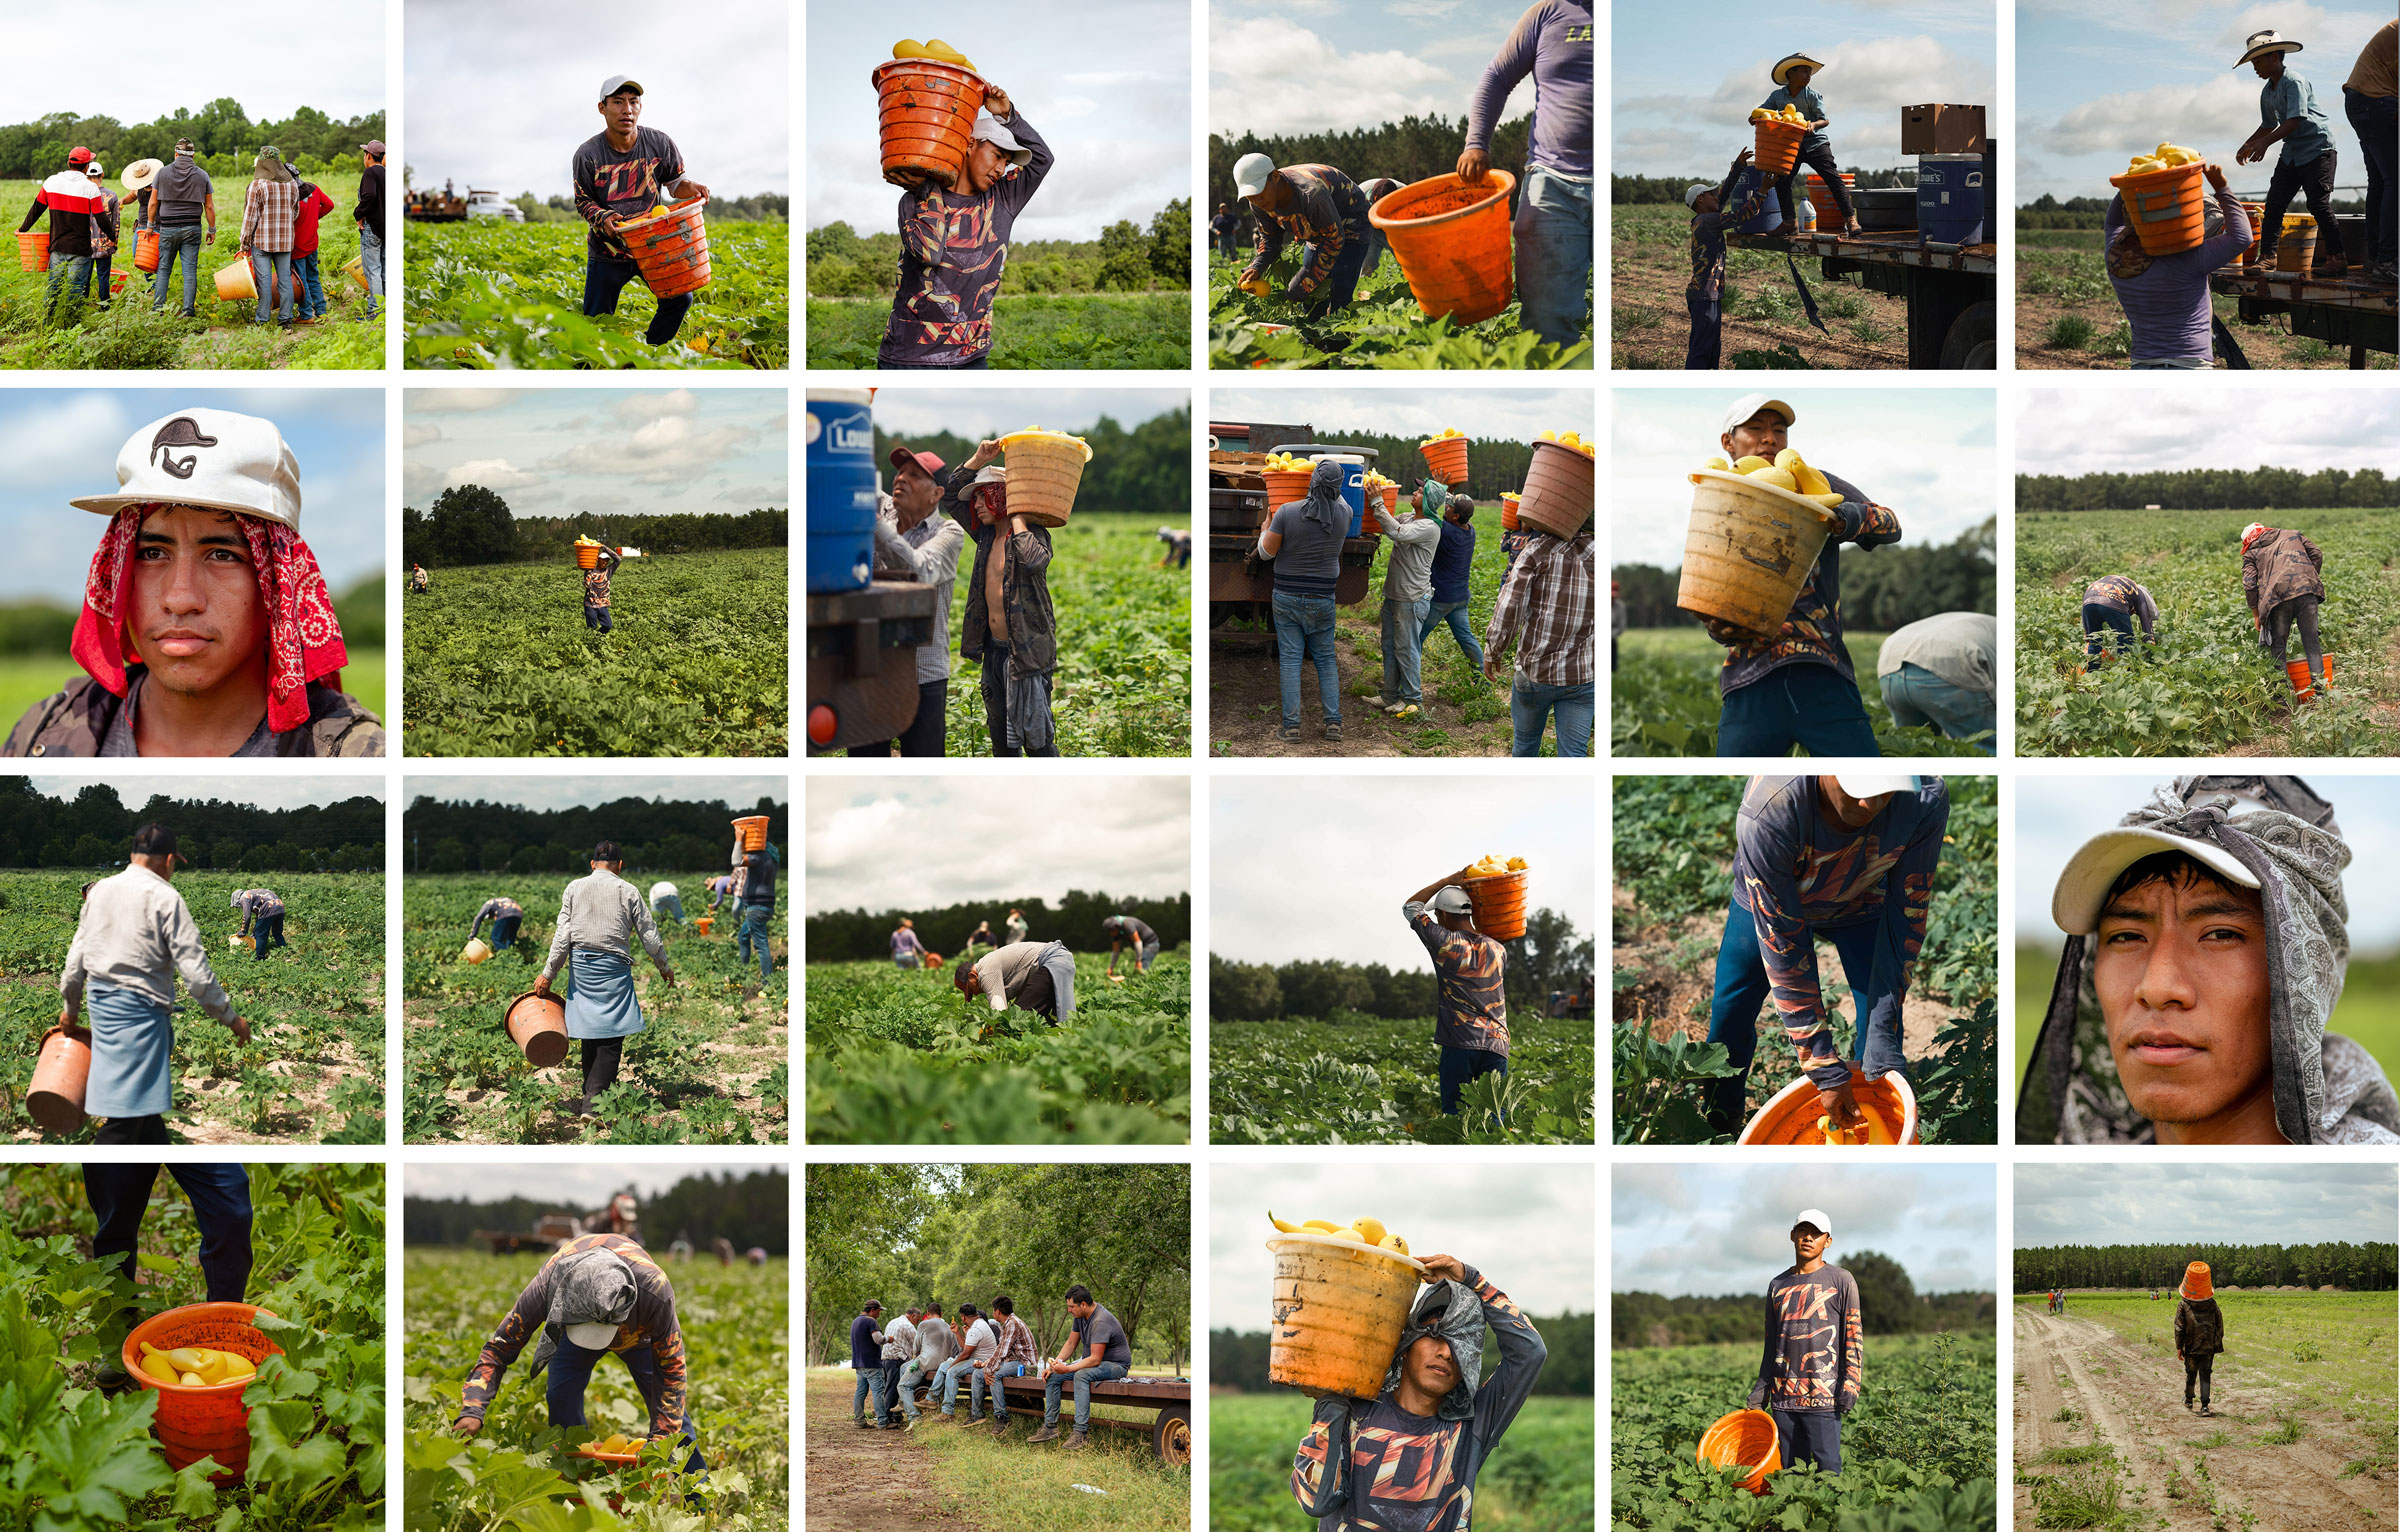 Migrant workers on six-month visas pick squash and peppers on a farm in Lyons, Georgia.